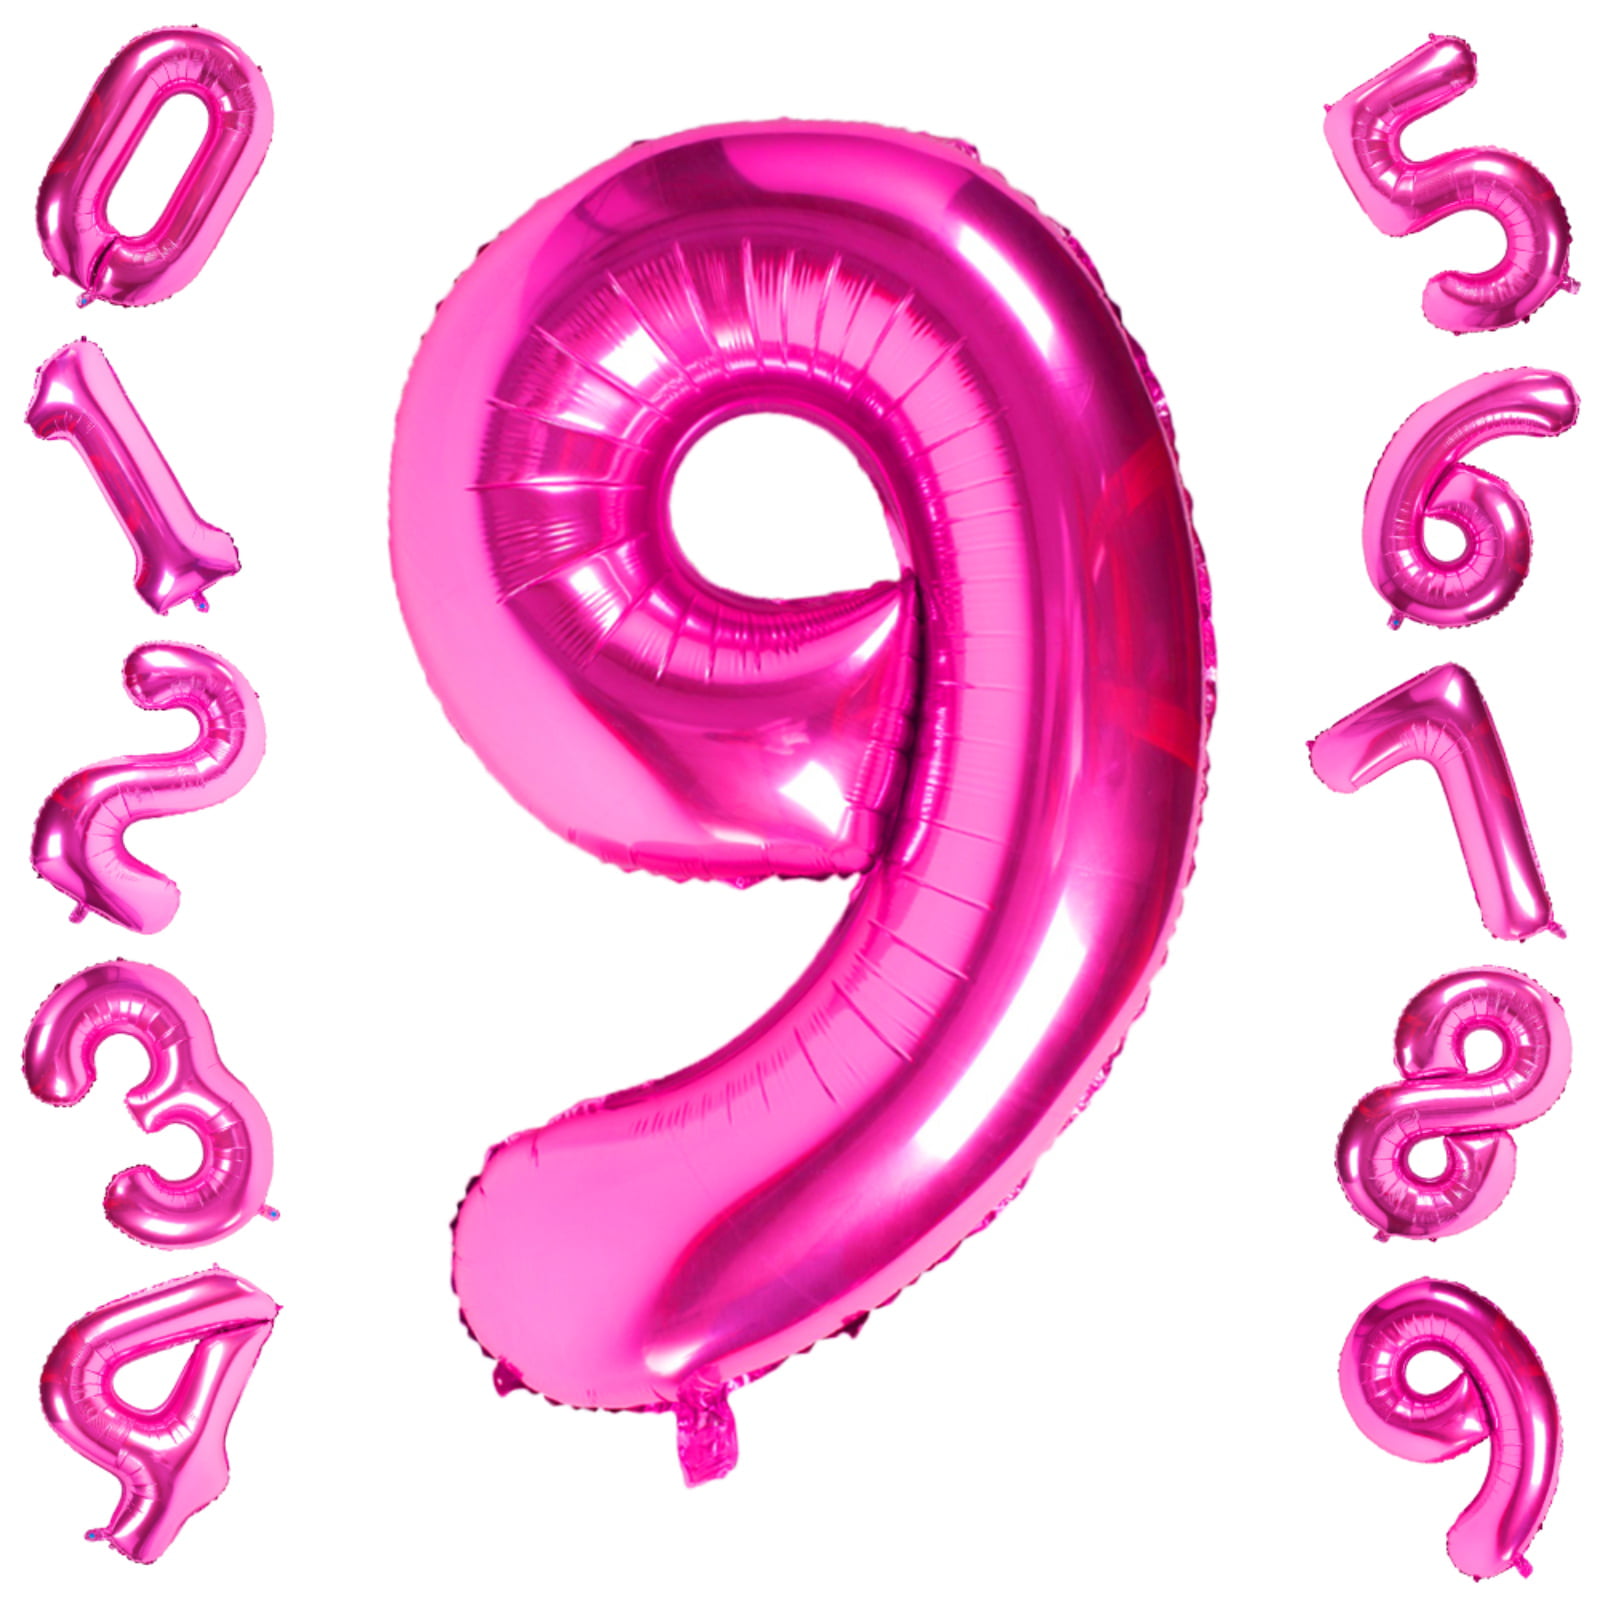 Number 0-9 Foil Balloon wholesales New Happy Birthday letter Balloon Party 